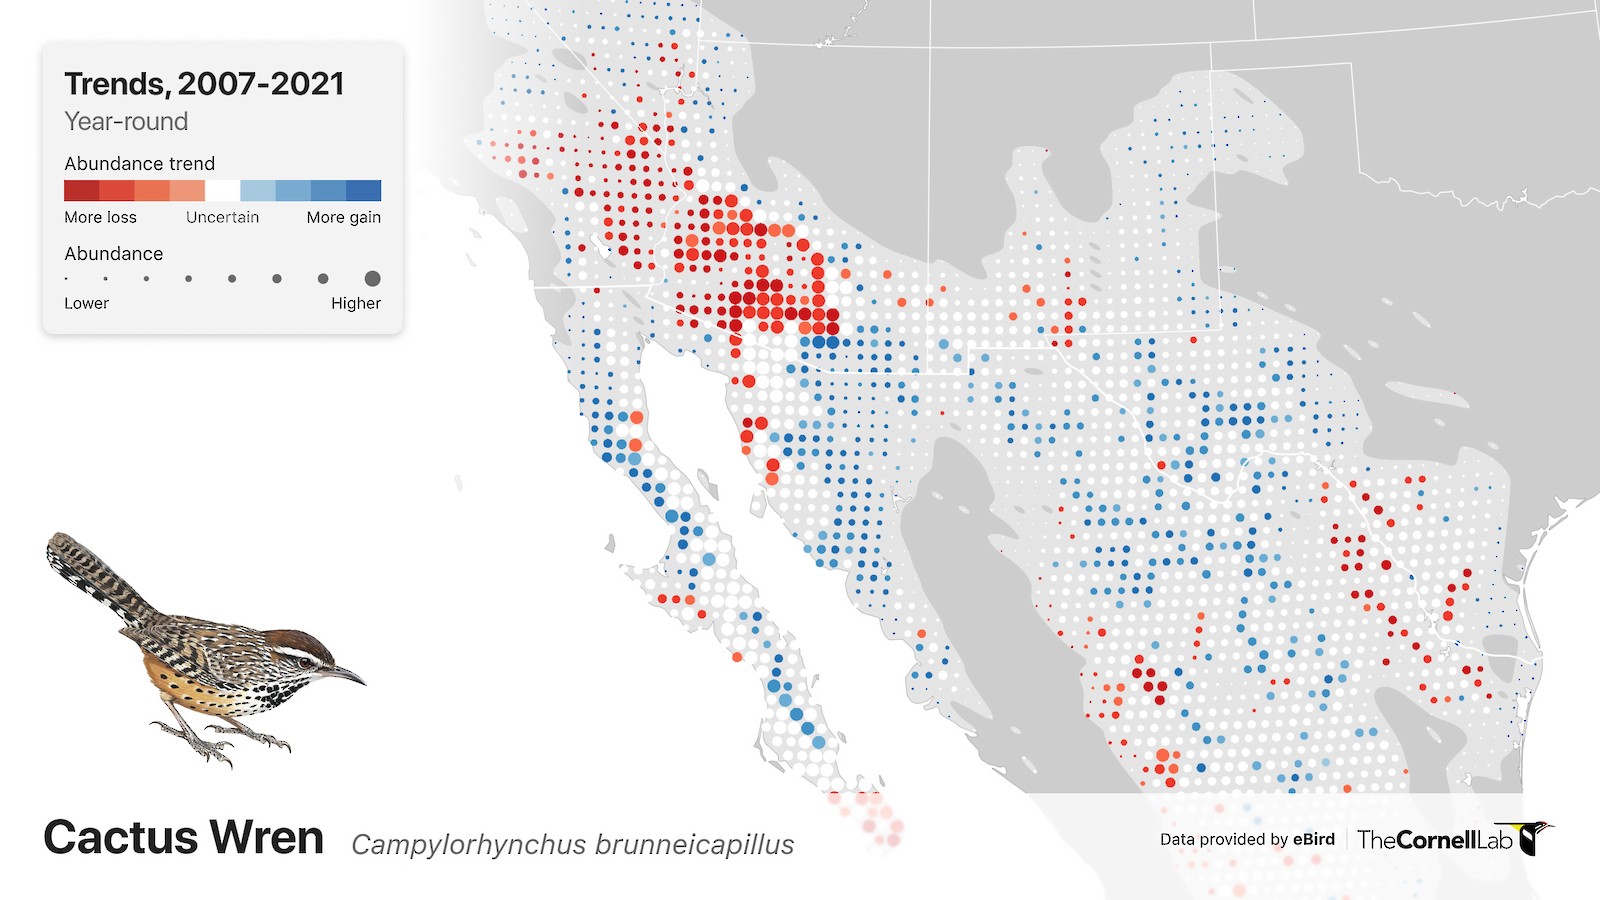 Map of the Southwestern U.S. and northern Mexico with red dots indicating populations declines and blue dots indicating population increases for Cactus Wren. 